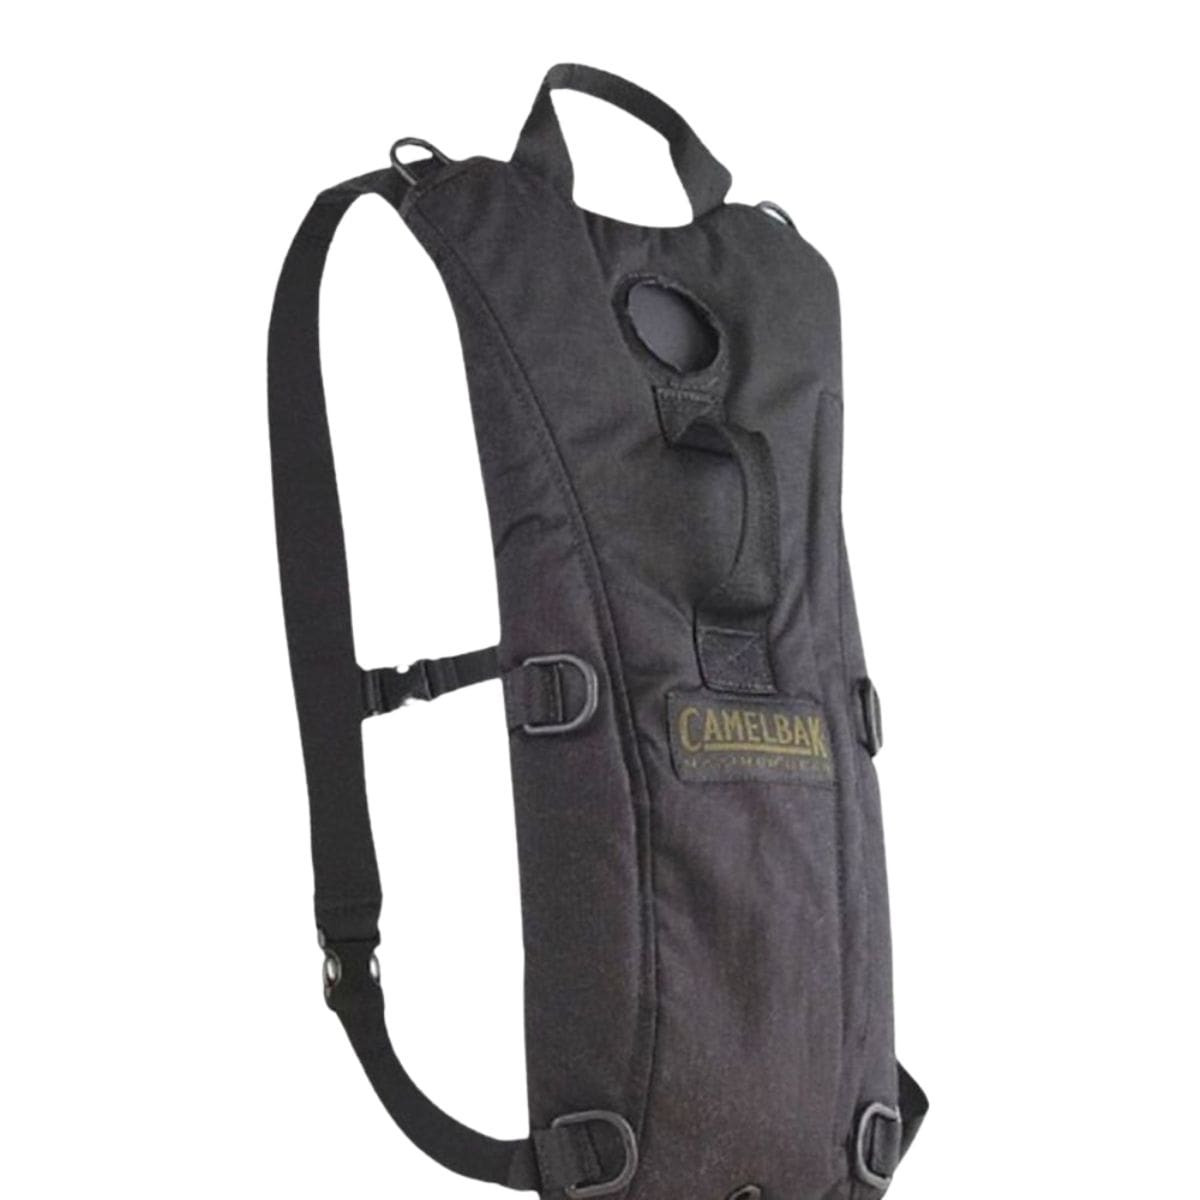 Image of Camelbak Thermobak 3L Hydration Backpack